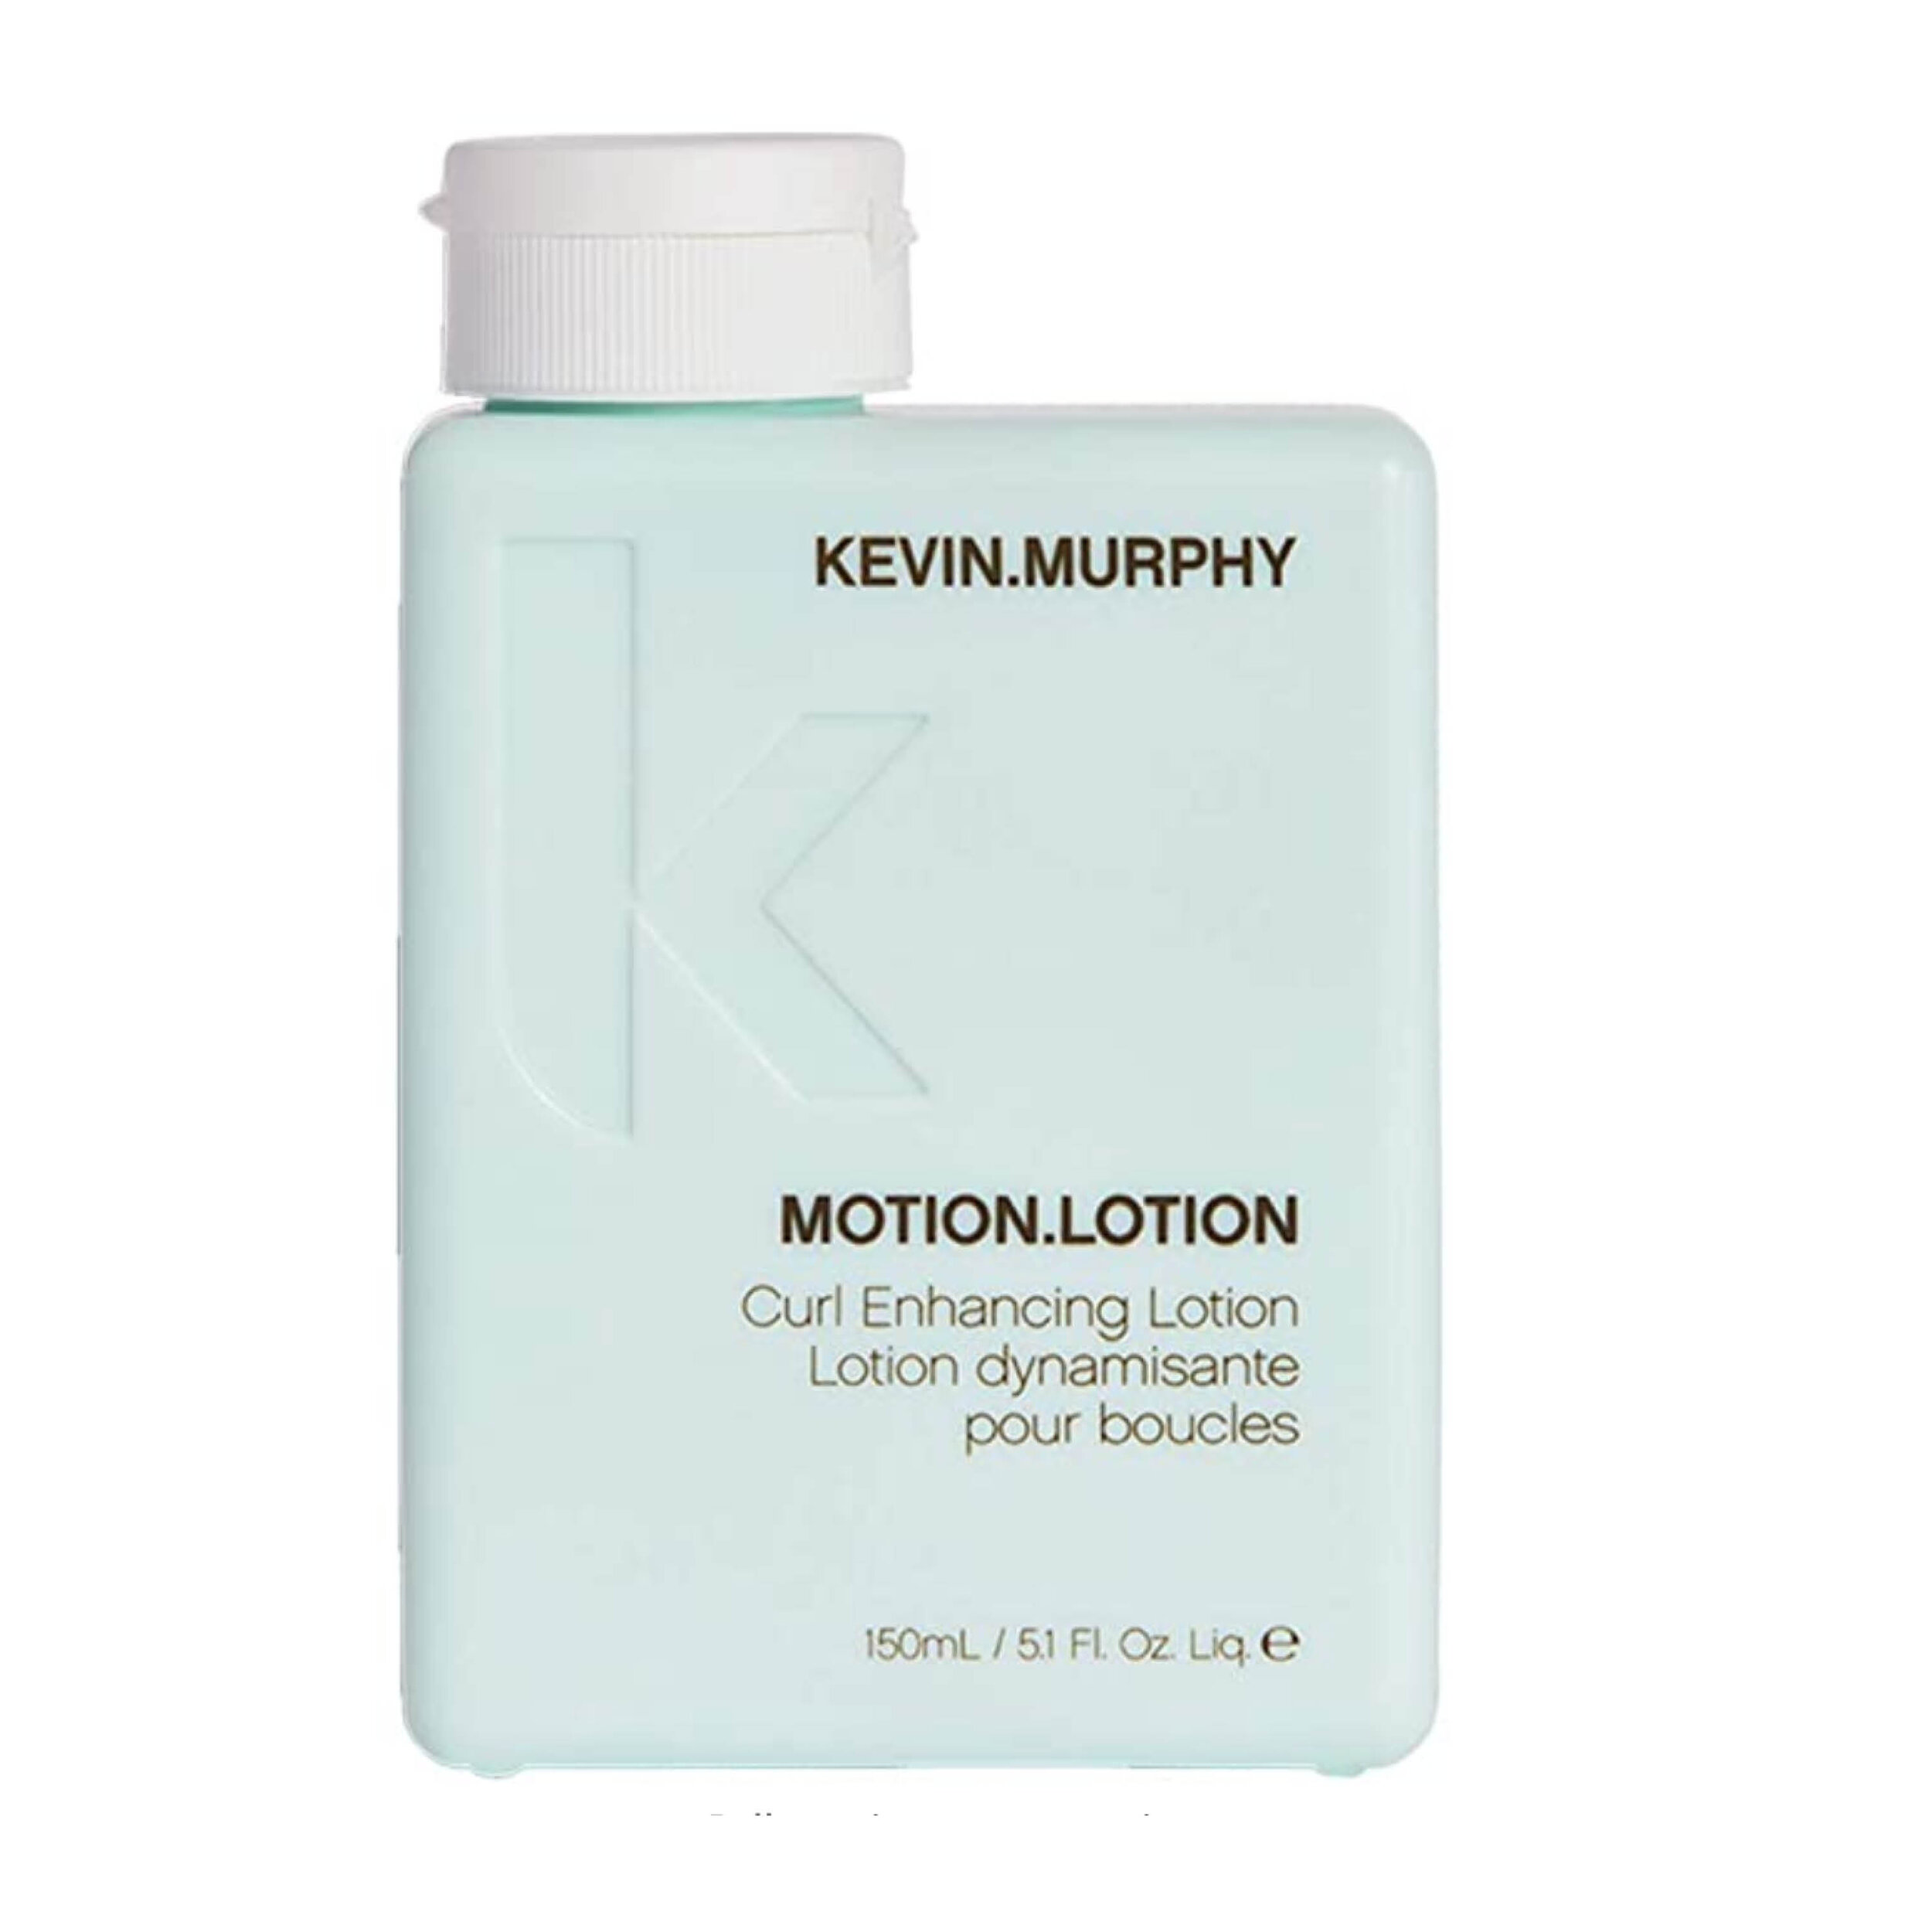 Kevin Murphy: Motion Lotion